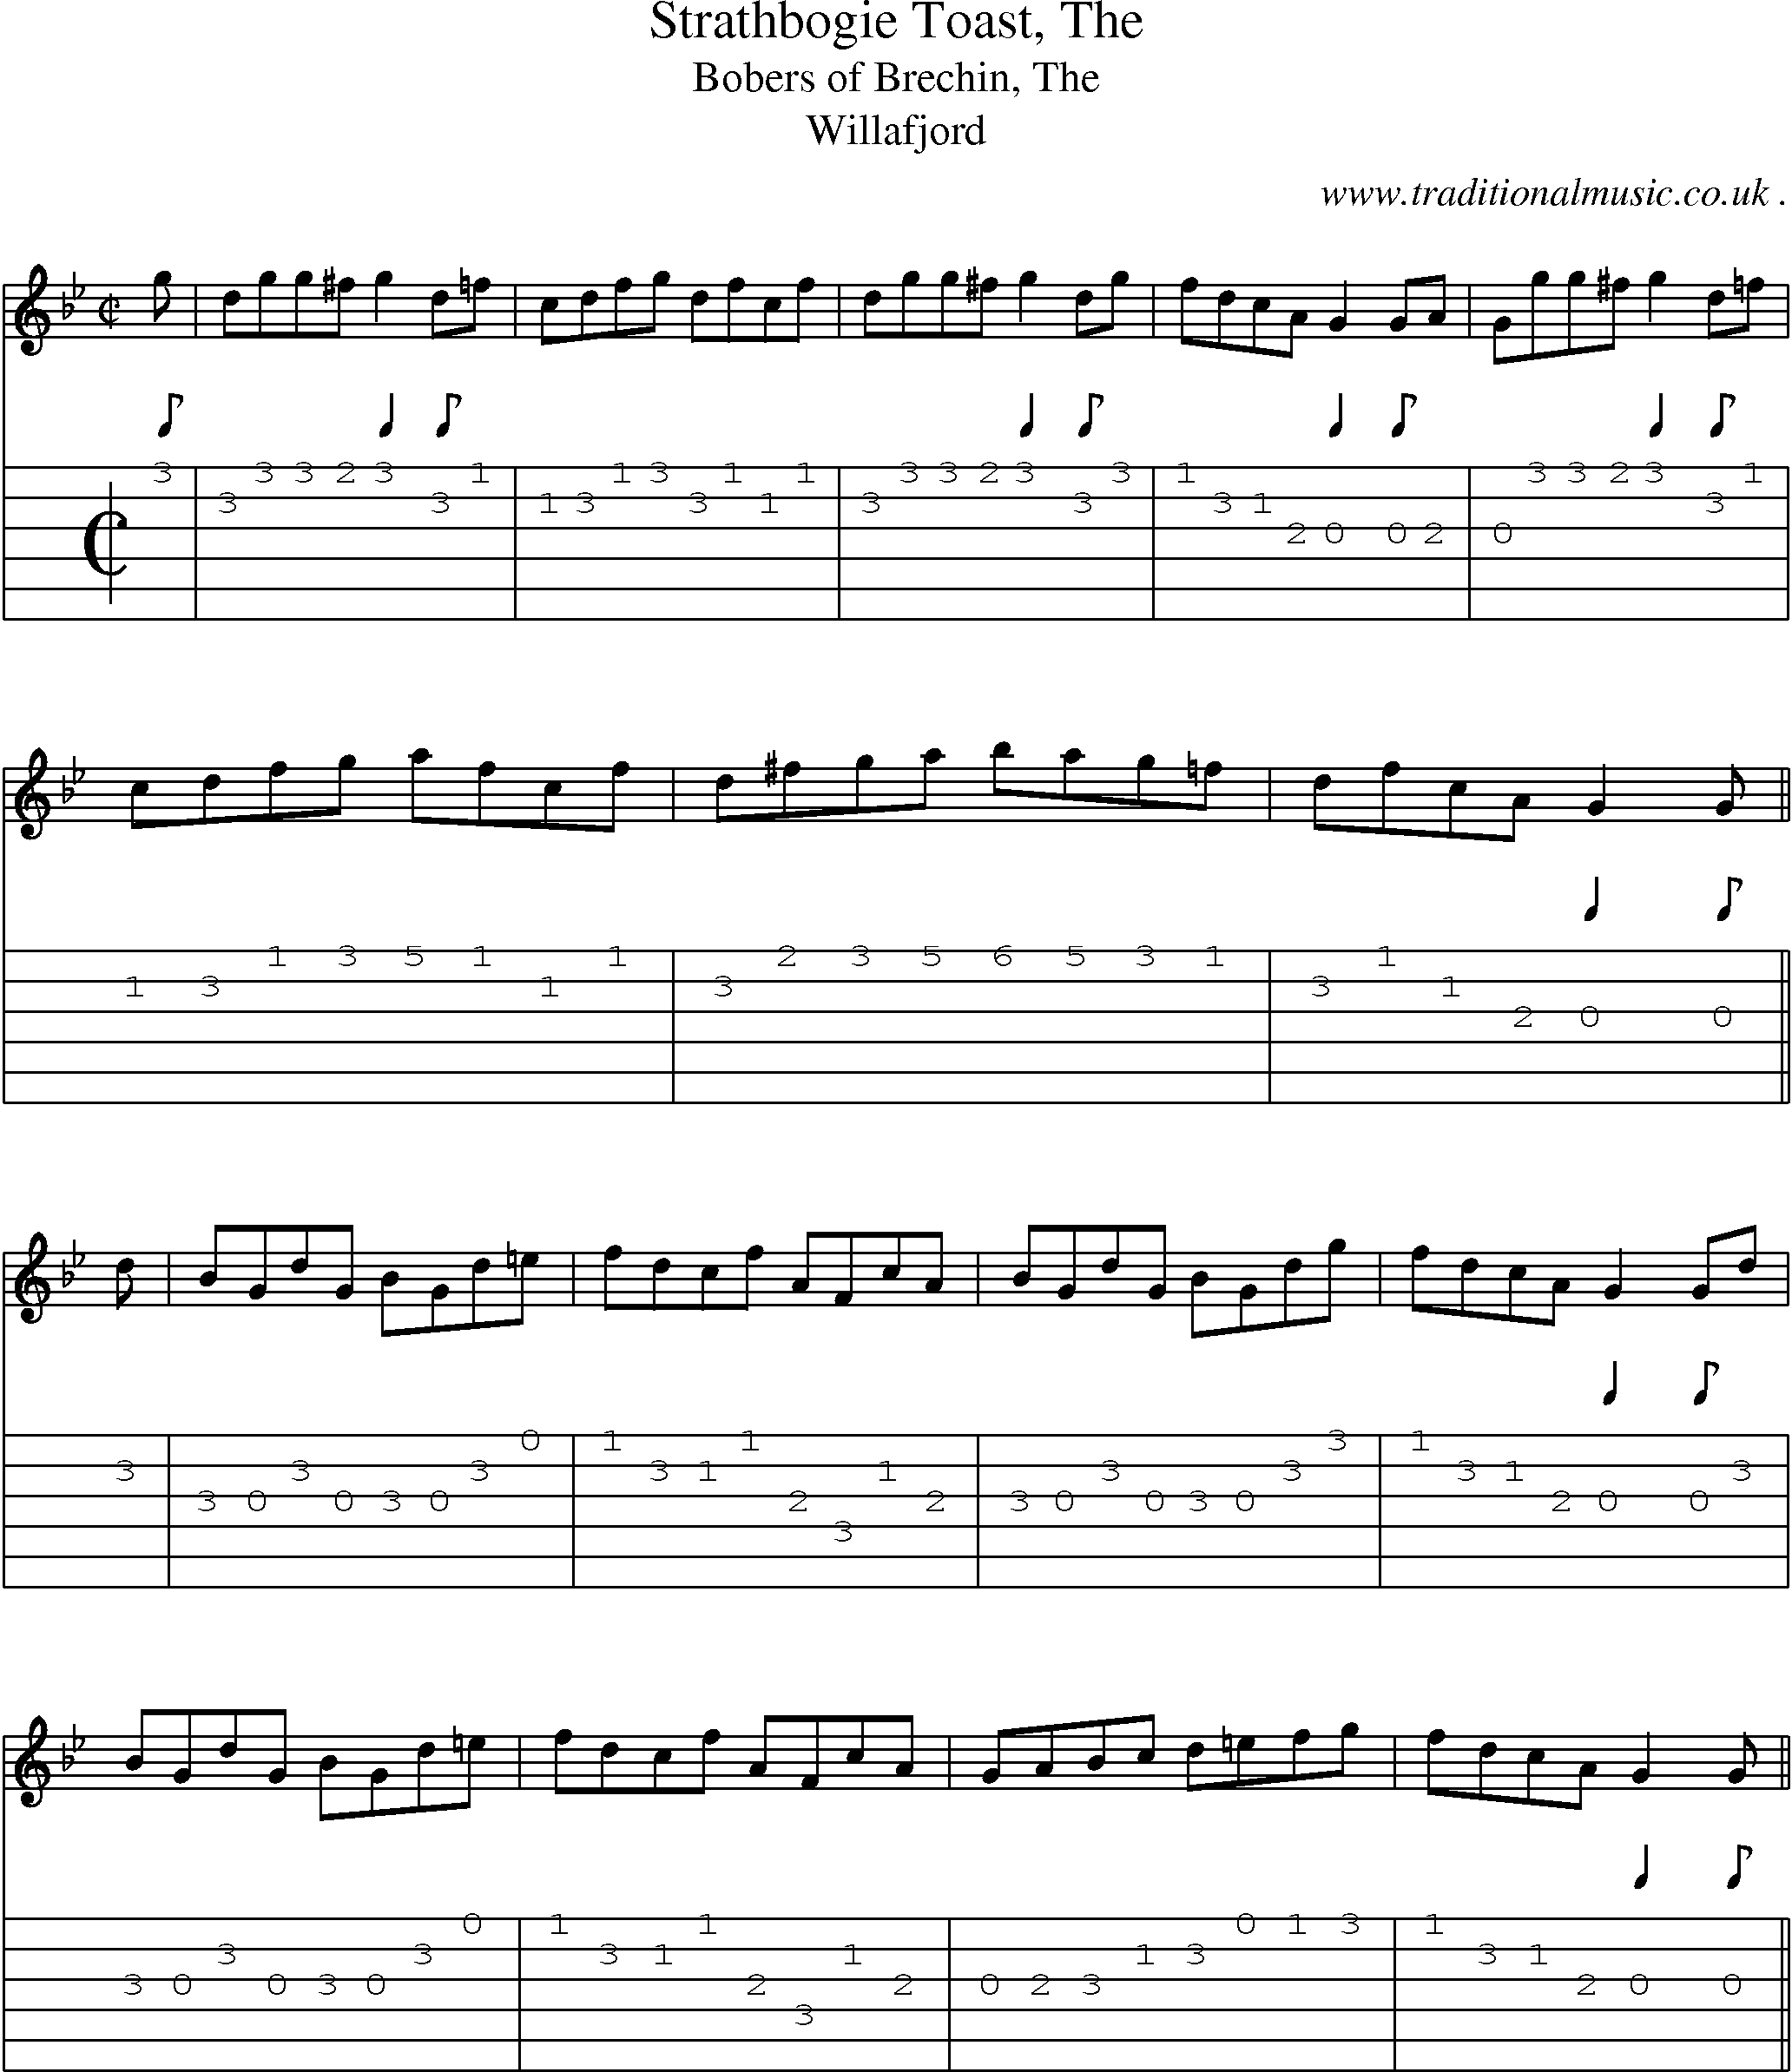 Sheet-music  score, Chords and Guitar Tabs for Strathbogie Toast The